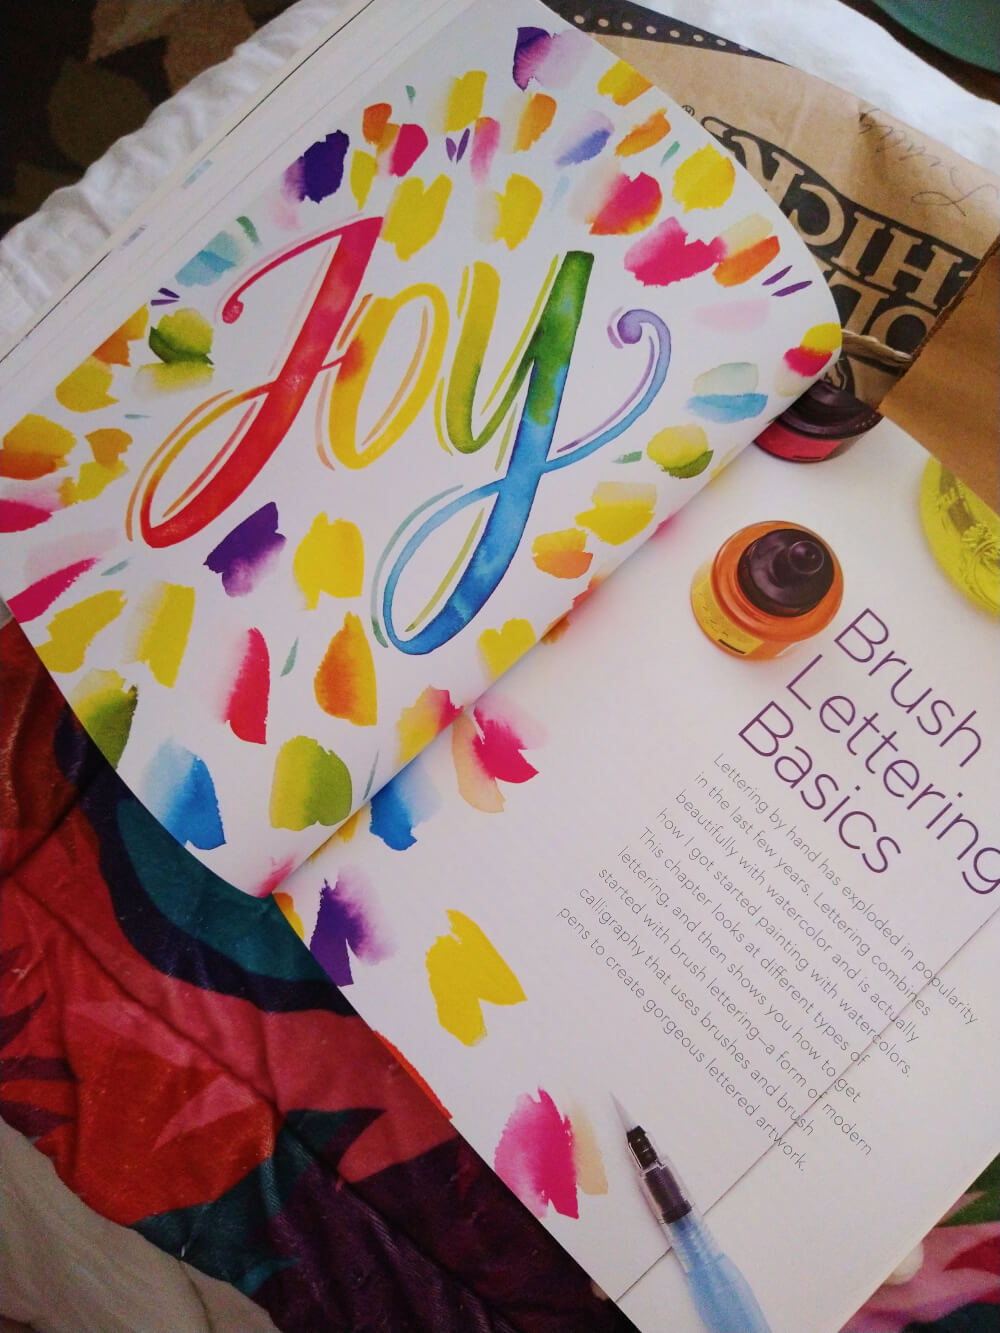 watercolor book open to brush lettering basics, says JOY in watercolor